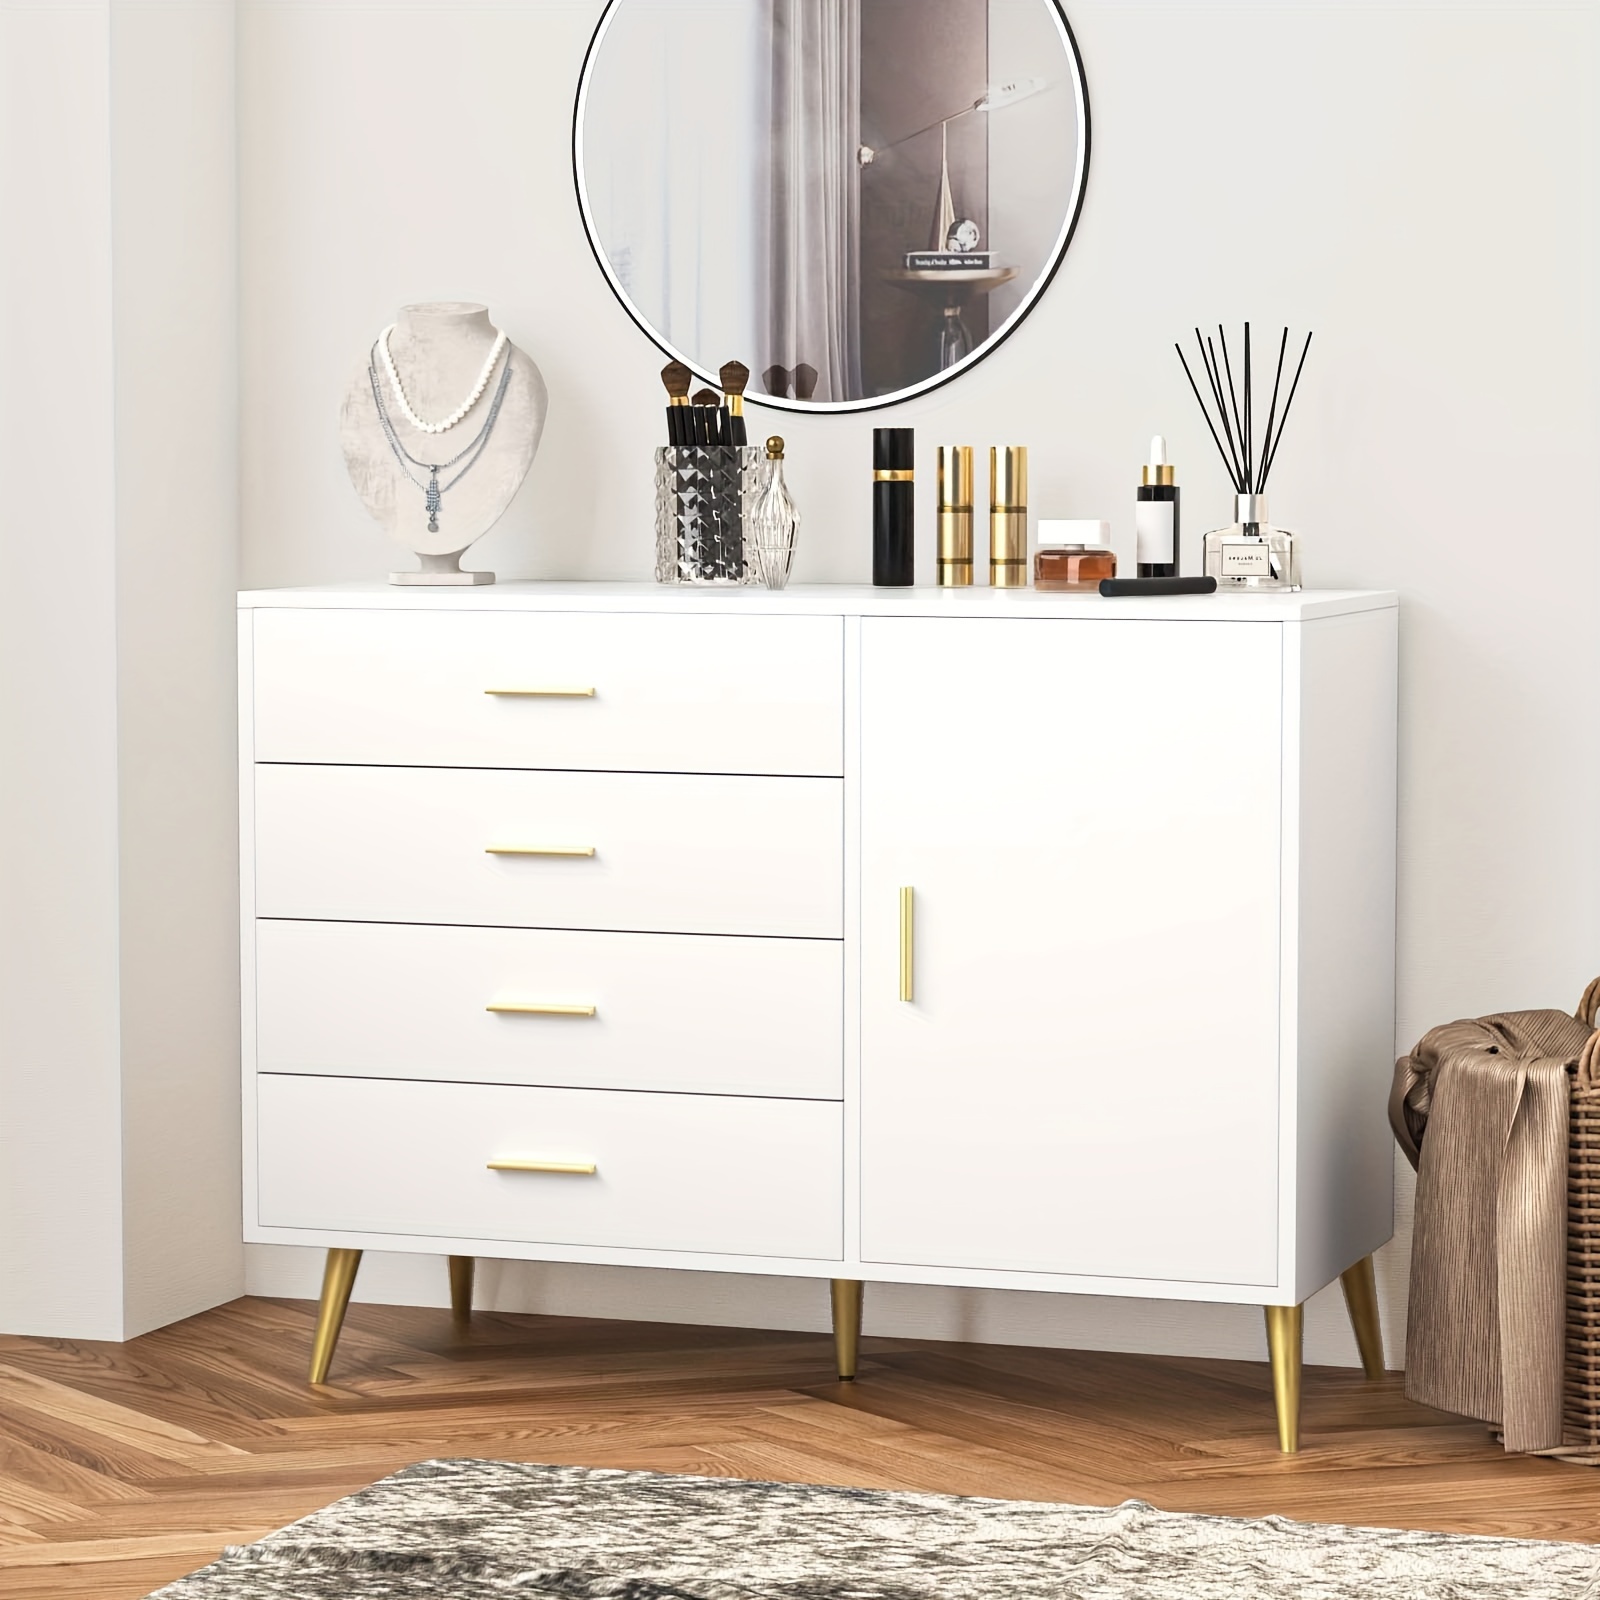 

Storage Cabinet With Drawers & Door, Sideboard Cabinet With Adjustable Shelf, Printer Stand For Home Office, Free Standing Accent Cabinet For Living Room, Bedroom And Hallway